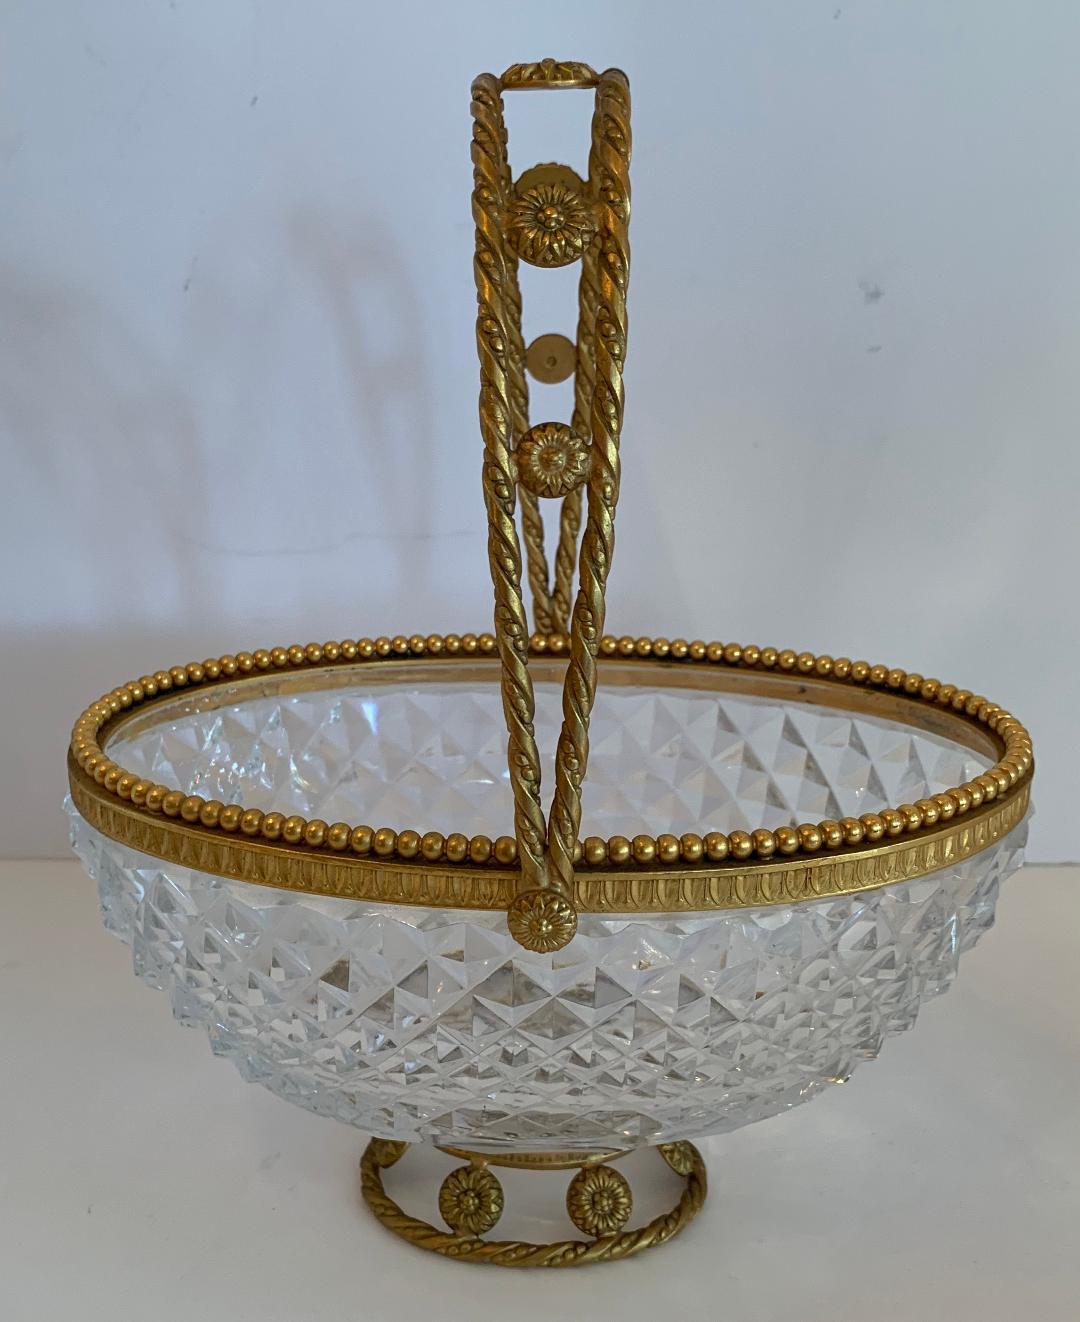 A Wonderful French Gilt Dore Bronze & Diamond Cut Crystal Oval Basket Centerpiece Bowl With Pierced Movable Handle

Two Available 
Each Sold Separately